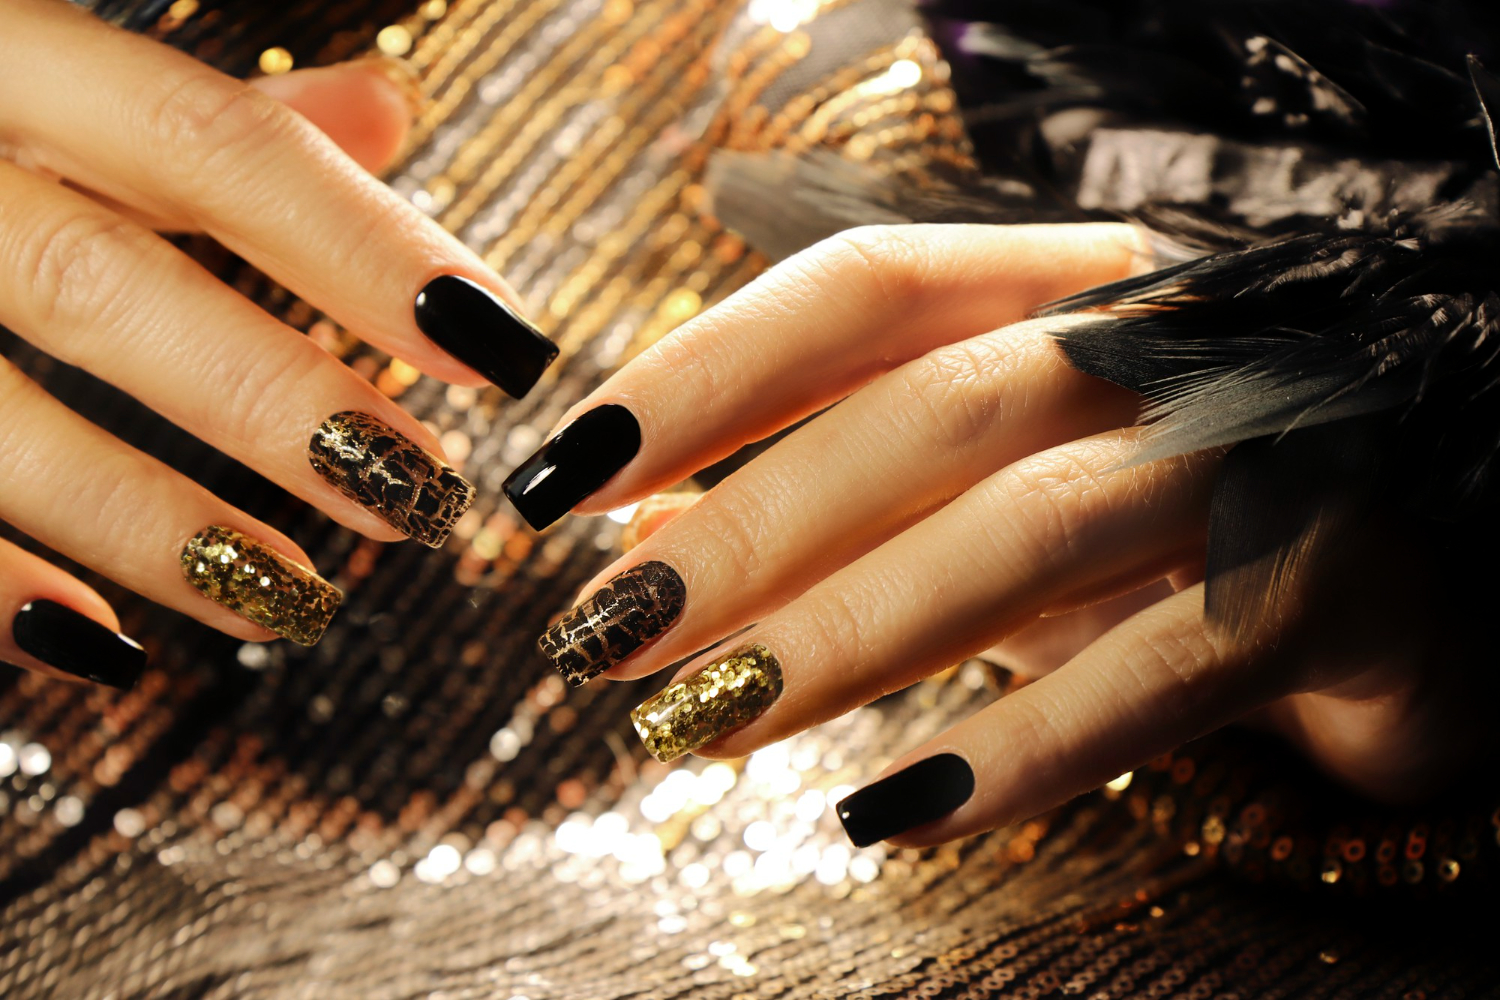 holiday-manicure-long-square-nails-with-golden-sequins-black-shiny-nail-polish-craquelure-matte-black-coating